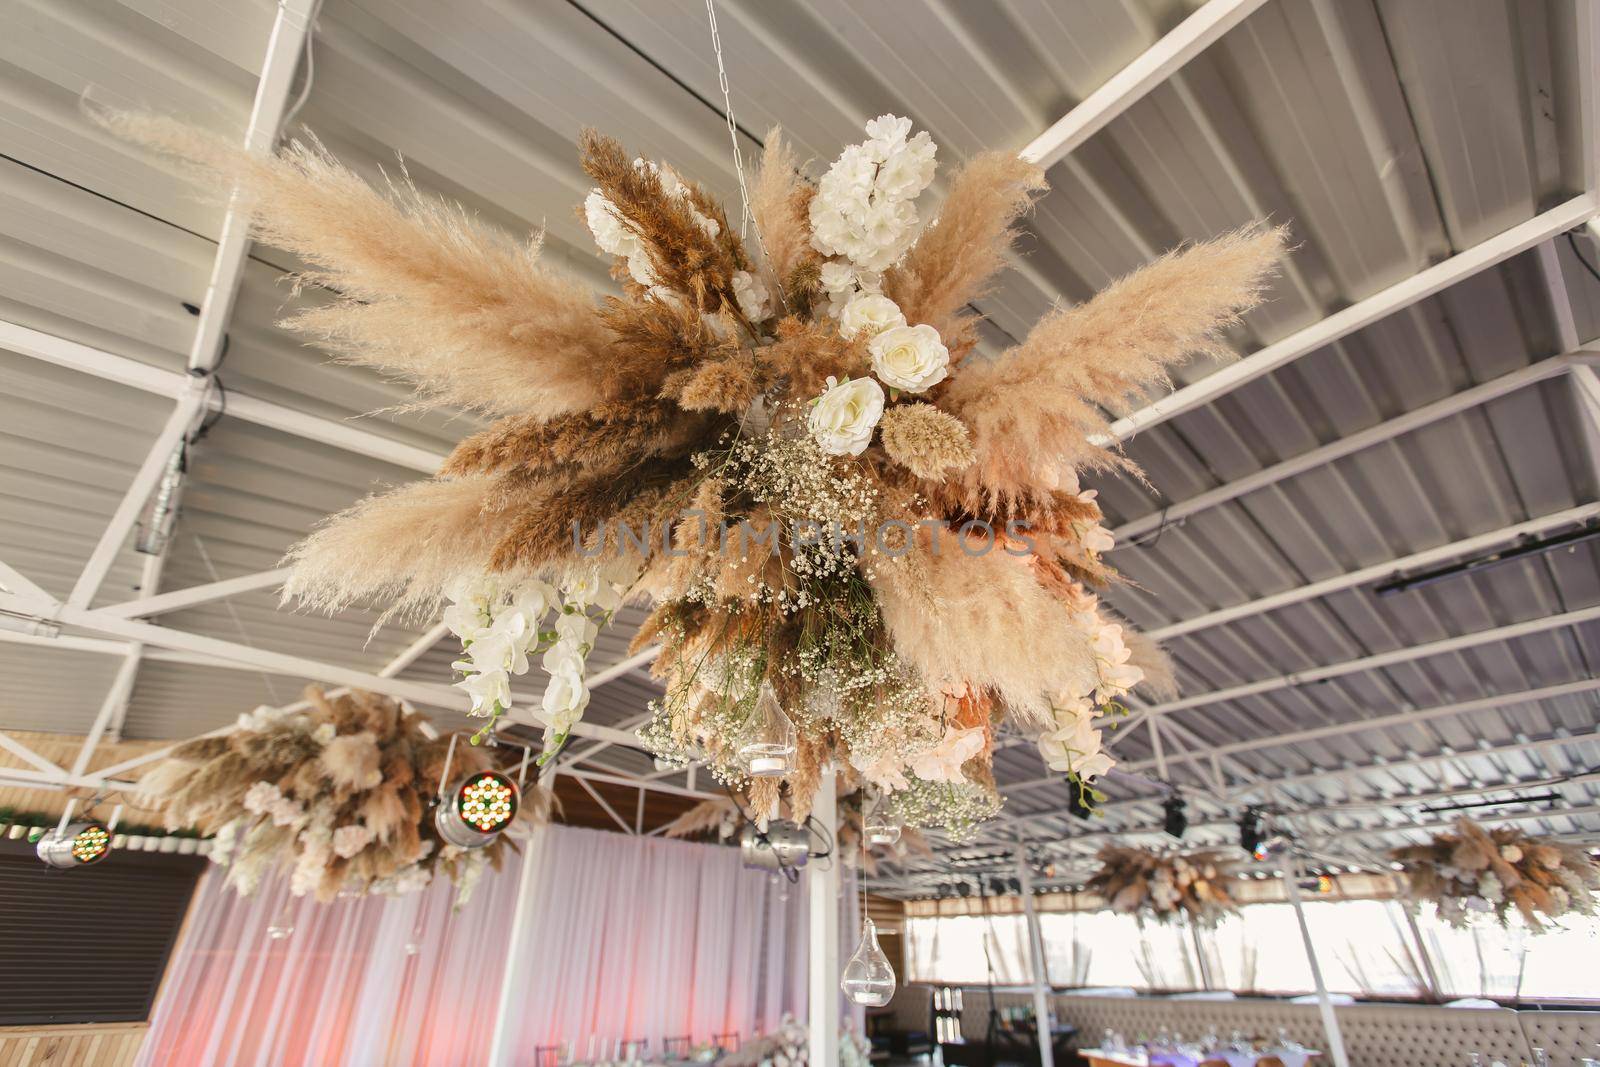 Wedding decor for newlyweds at a banquet. Floristry of dried flowers and candles in boho style.